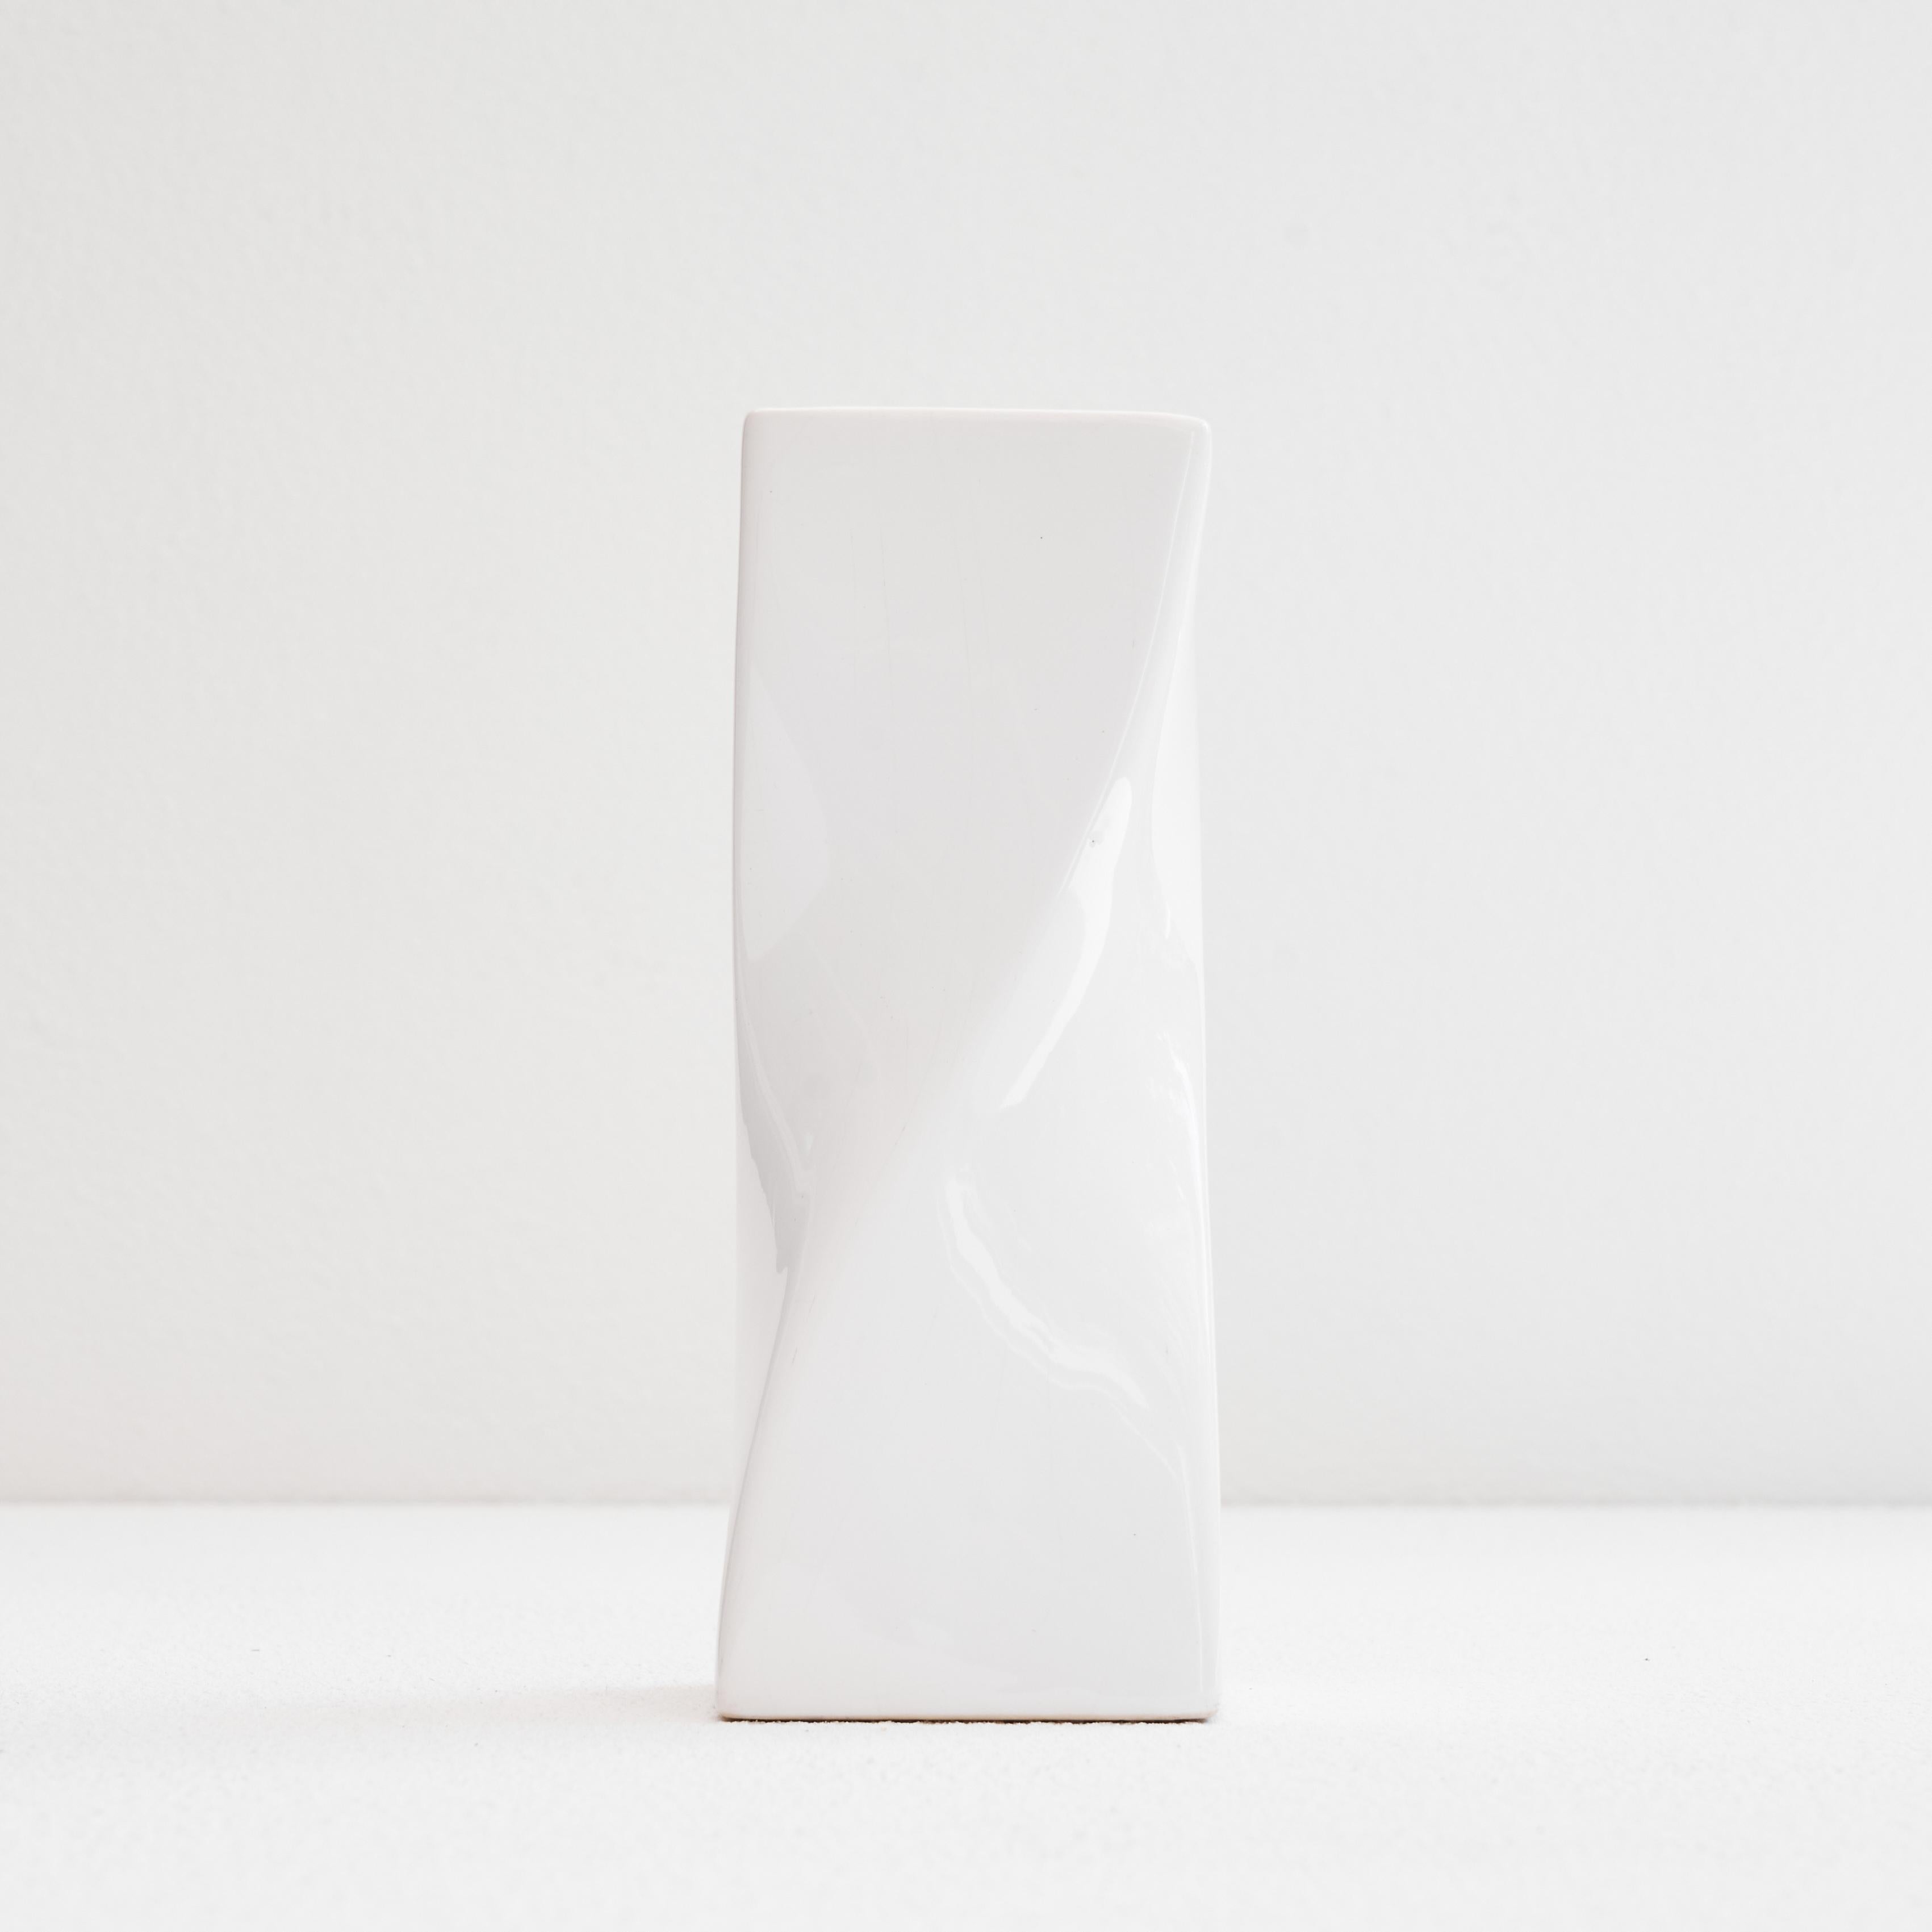 Unknown Twisted Vase in White Glazed Ceramic 1980s For Sale